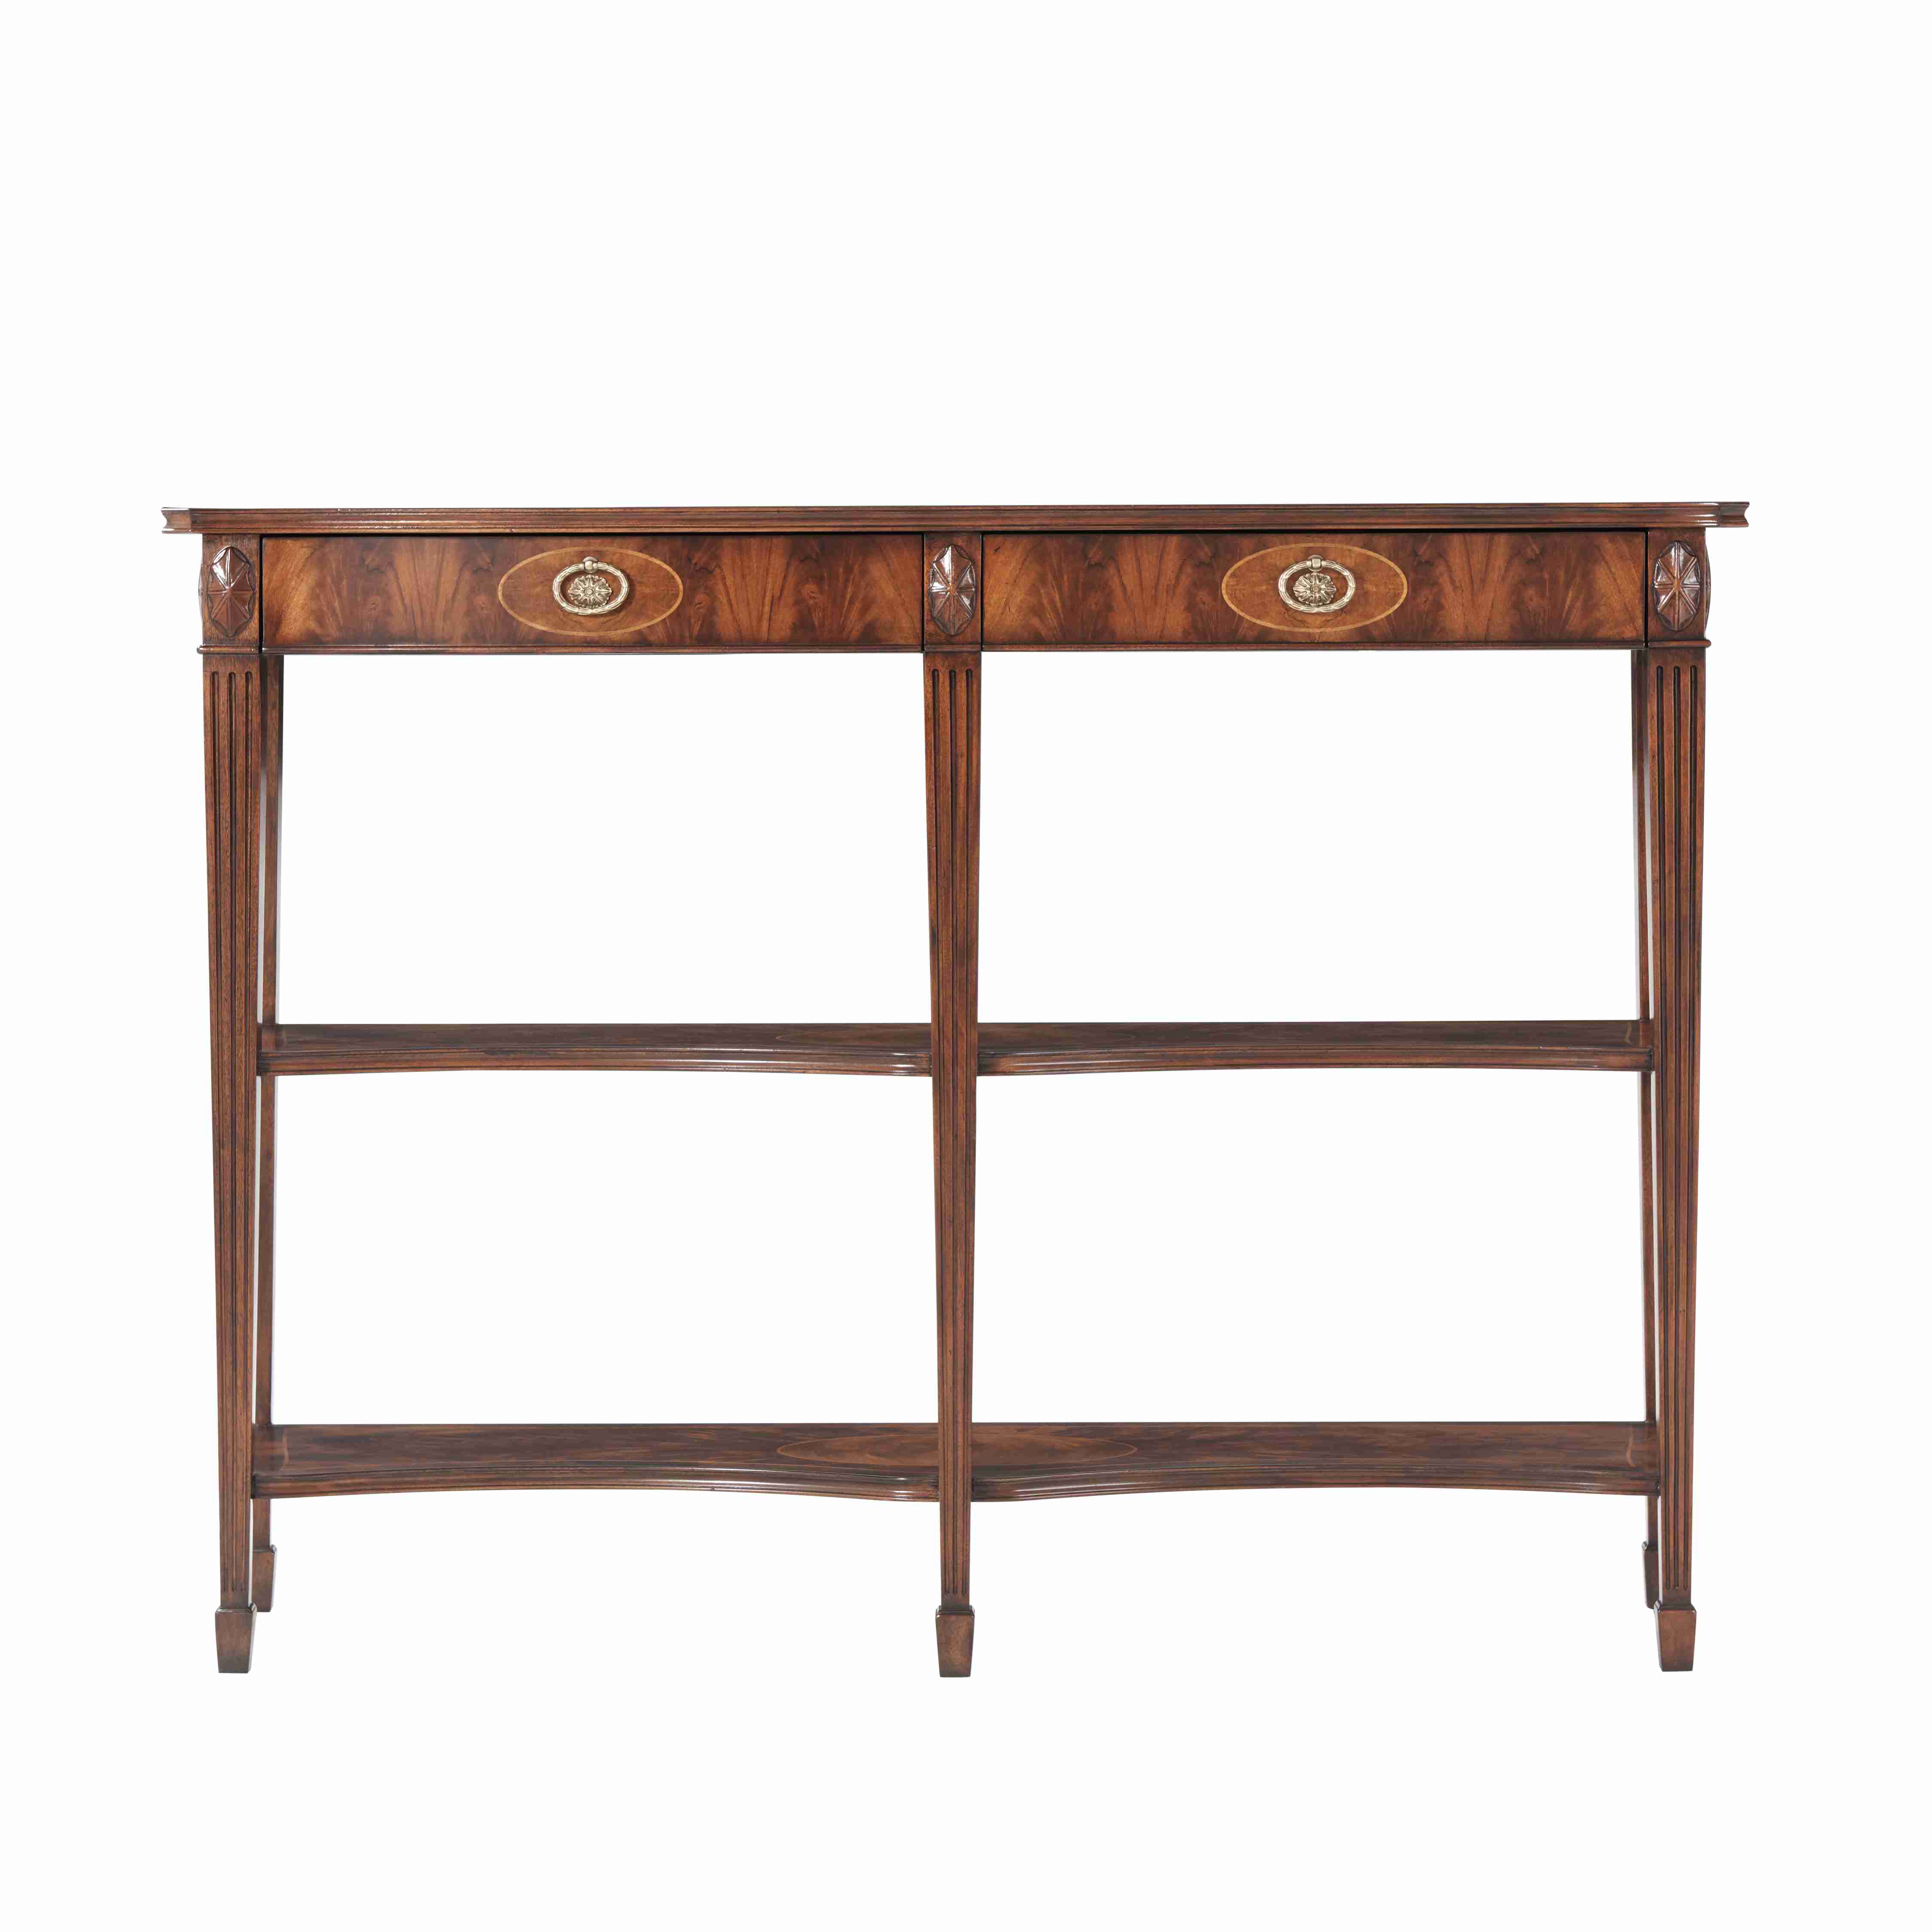 THE AUDLEY STREET CONSOLE TABLE